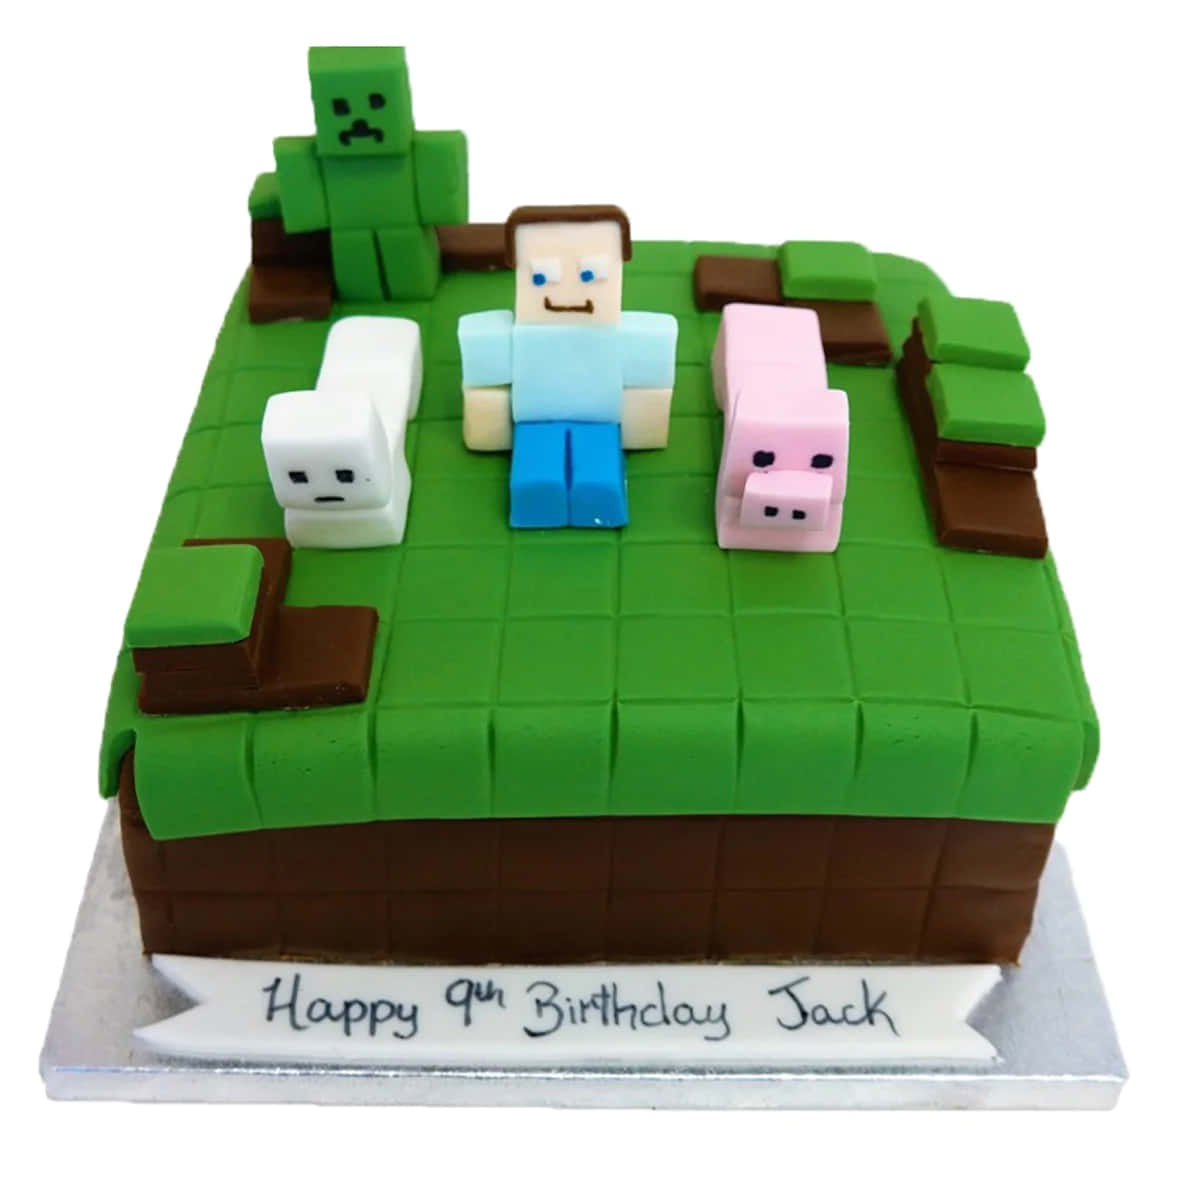 Minecraft Cake With A Couple Of People And A Sheep